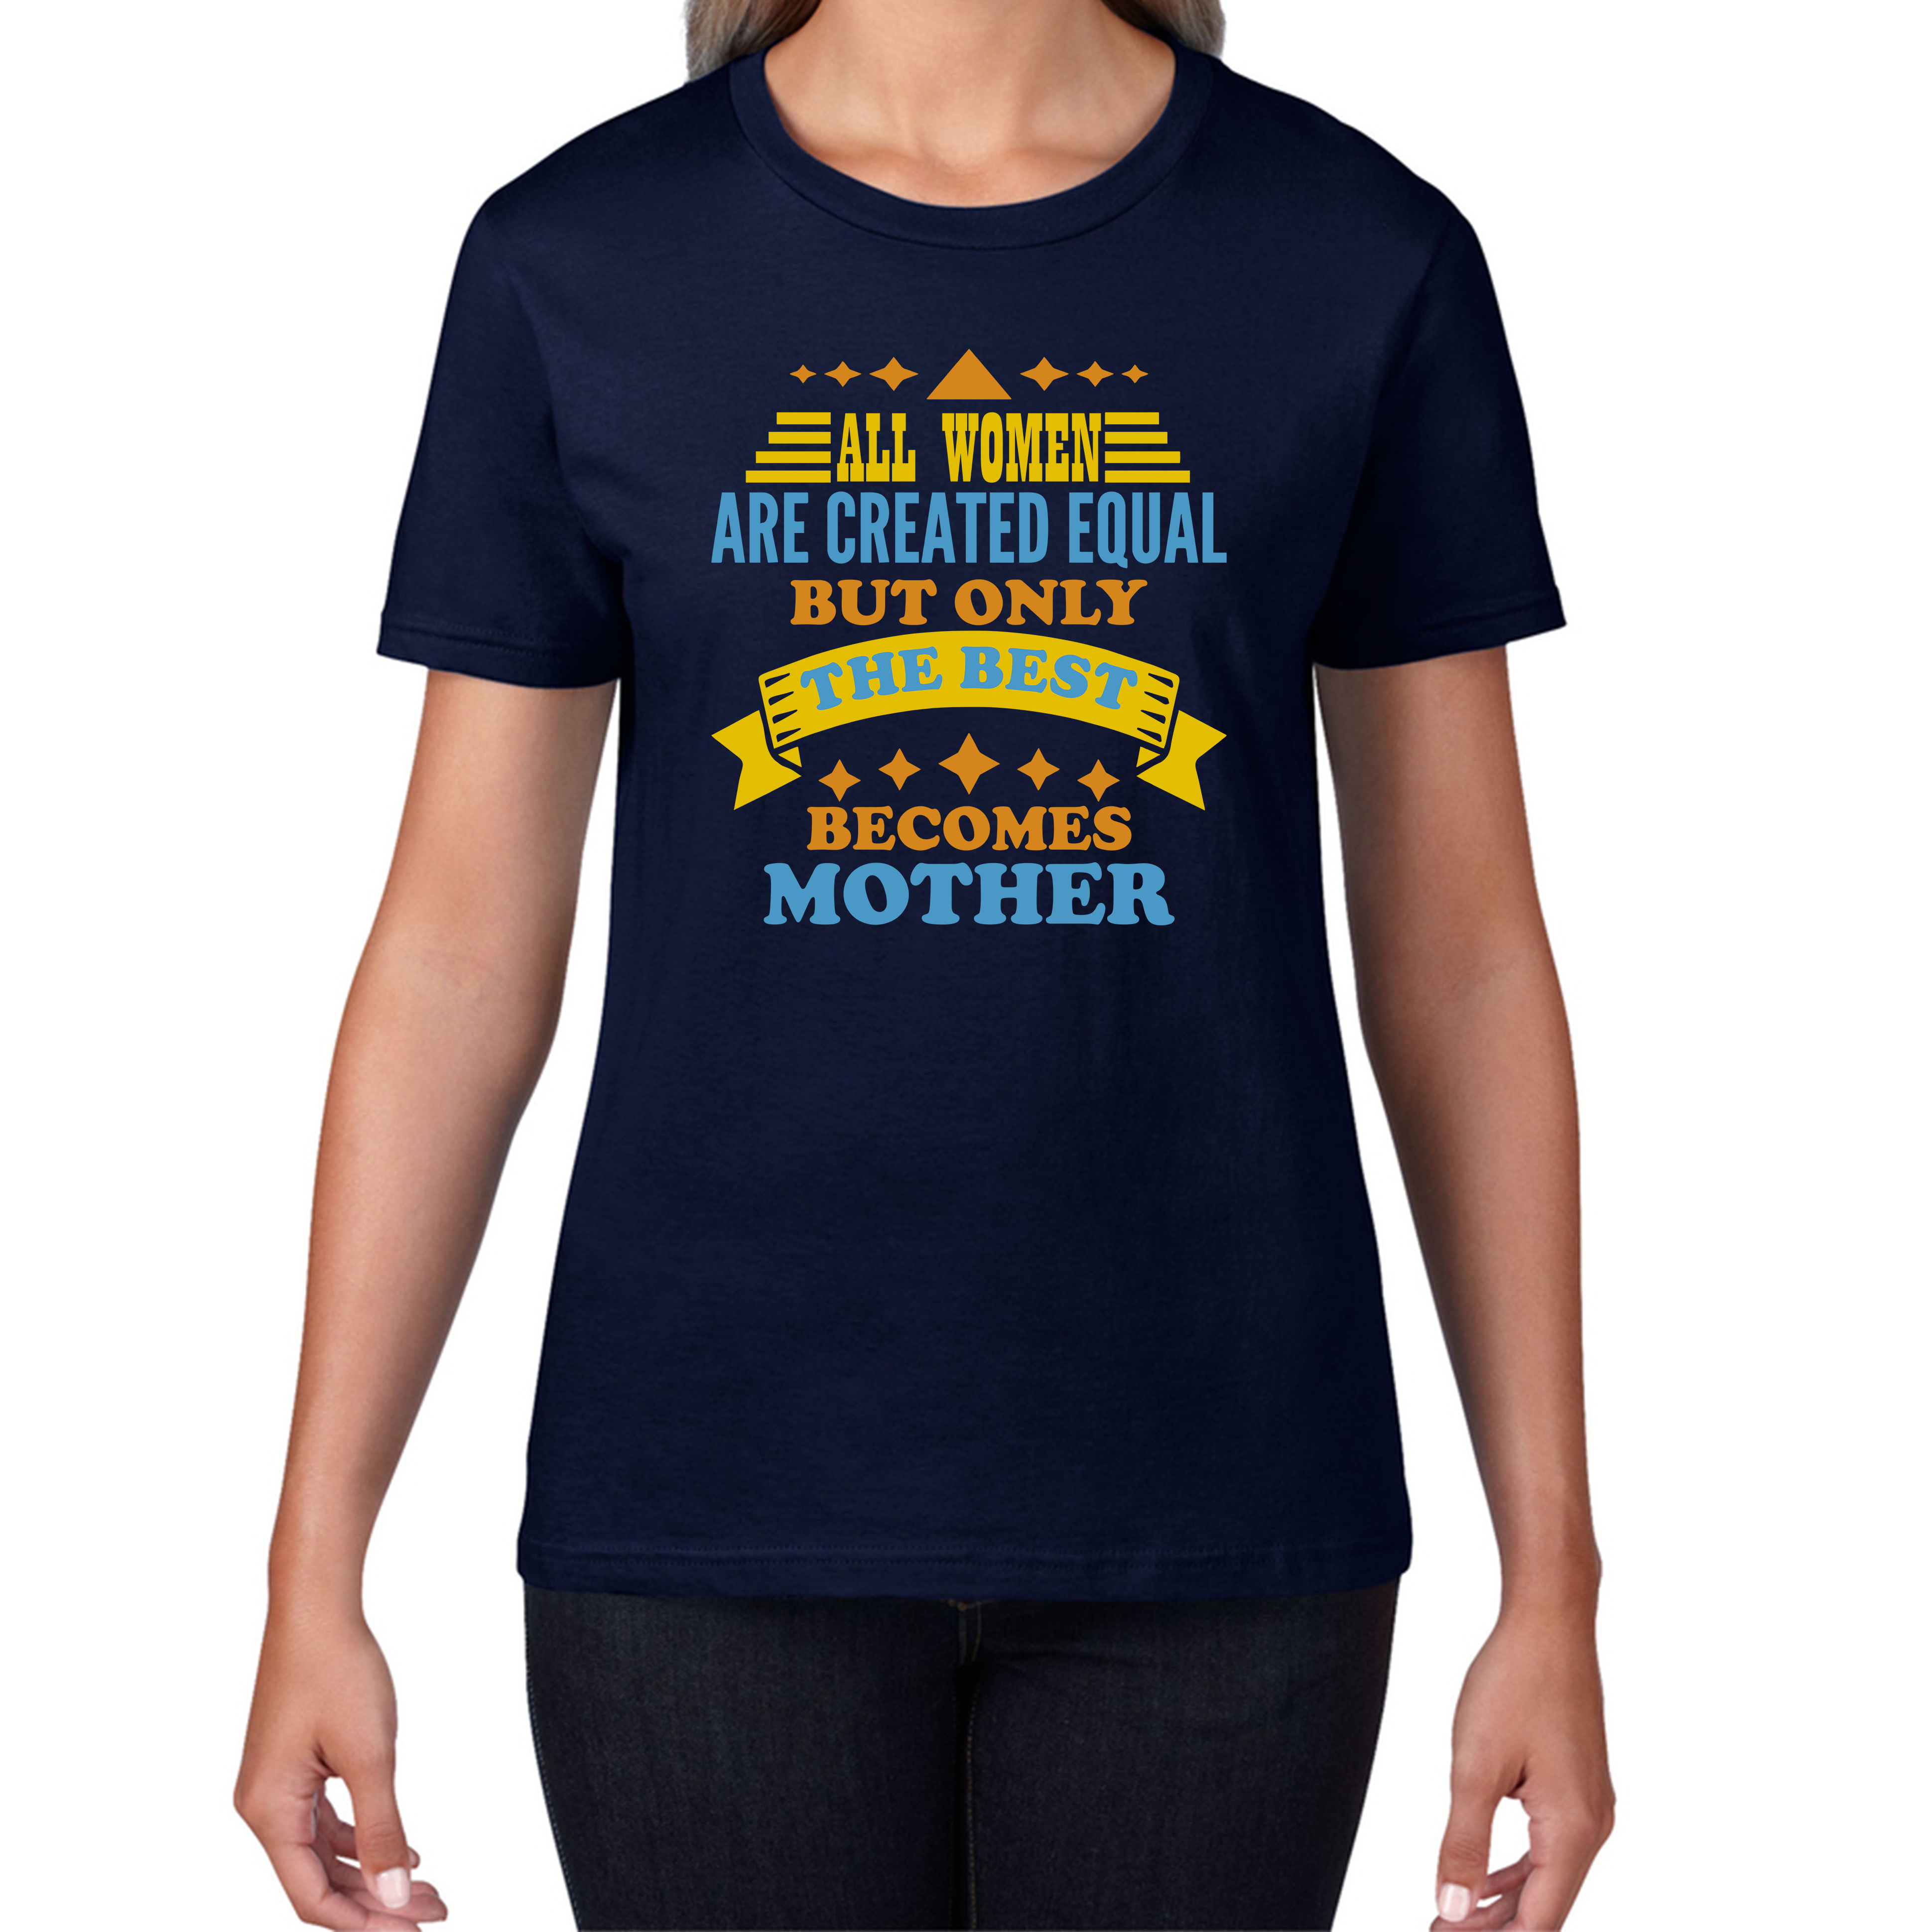 All Women Are Created Equal But Only The Best Becomes Mother Womens Tee Top